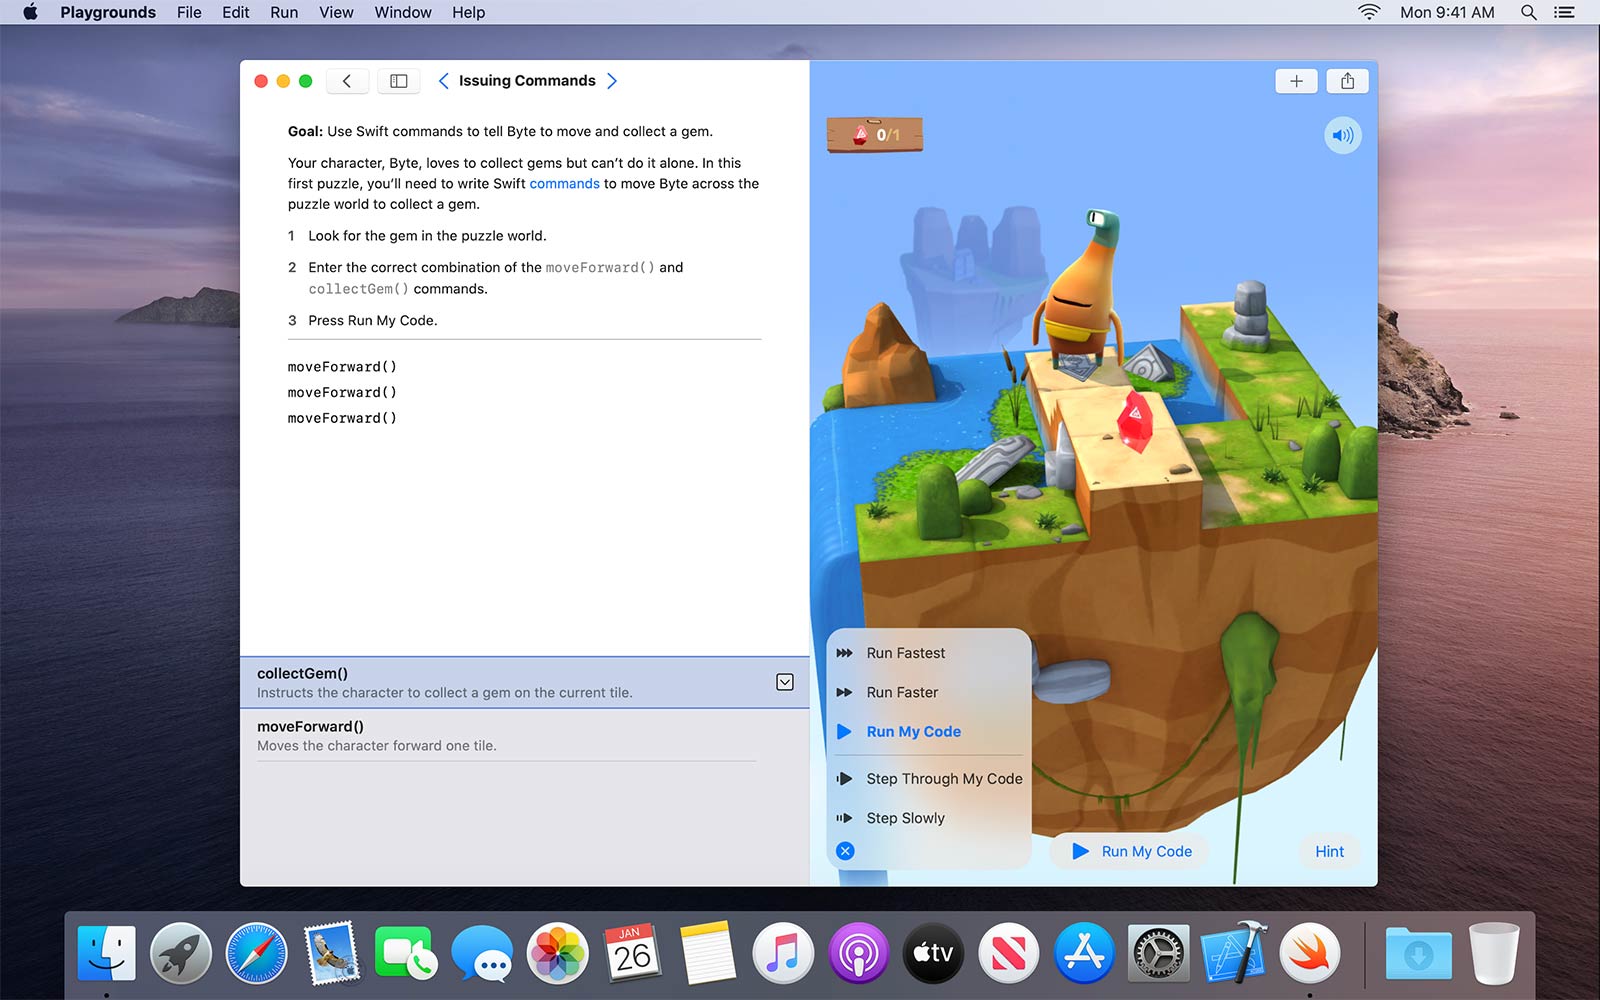 Swift Playgrounds for Mac